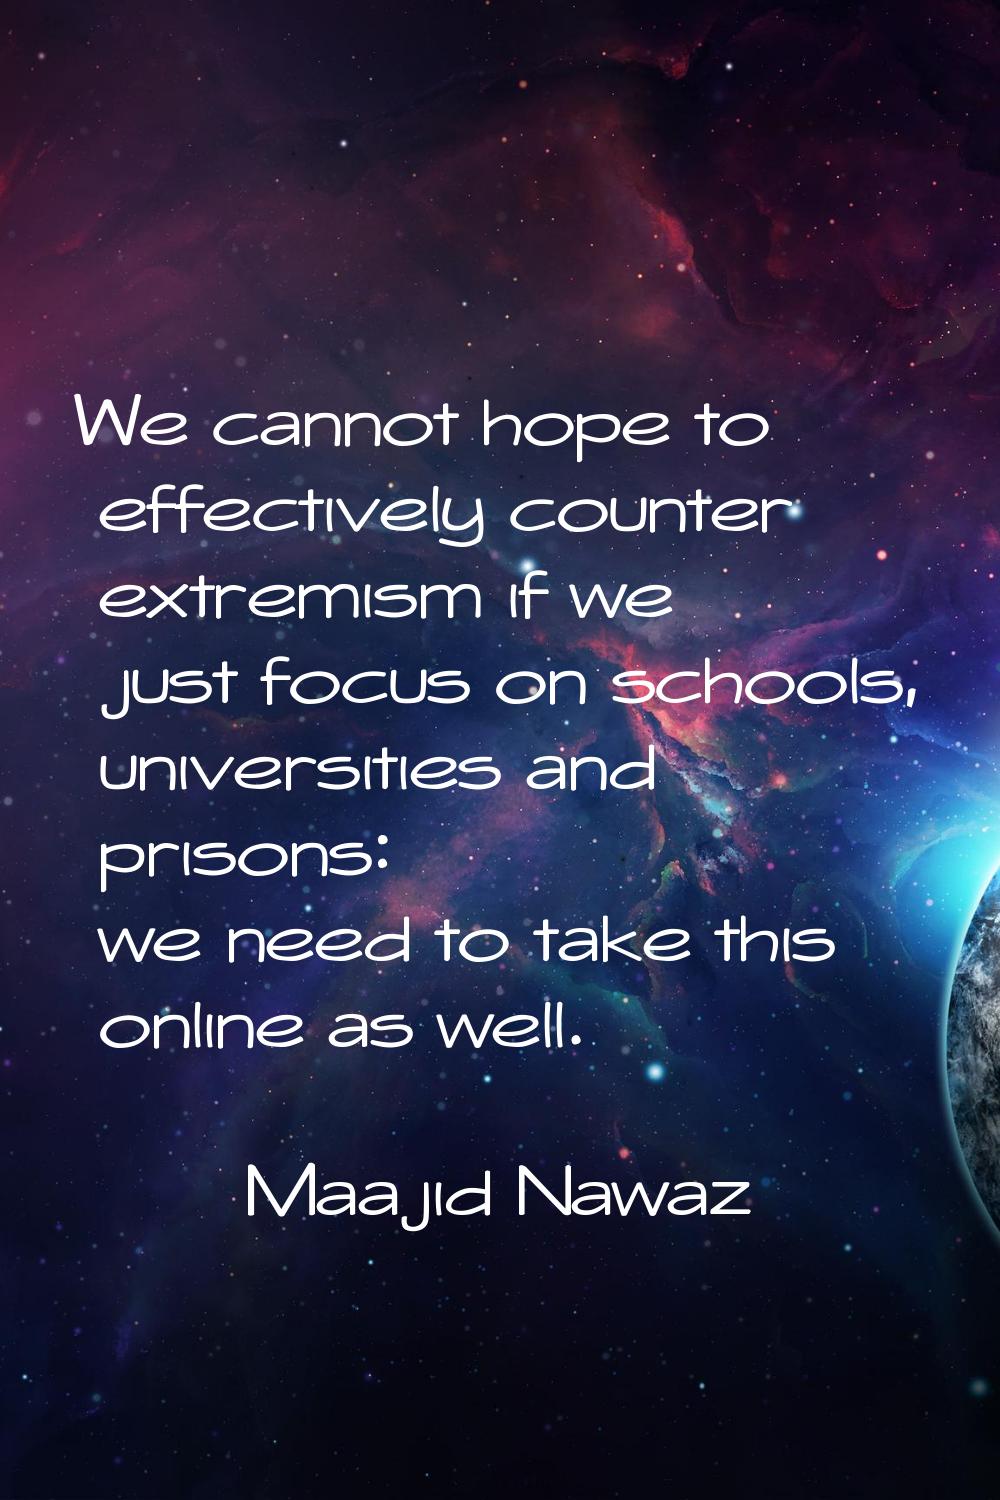 We cannot hope to effectively counter extremism if we just focus on schools, universities and priso